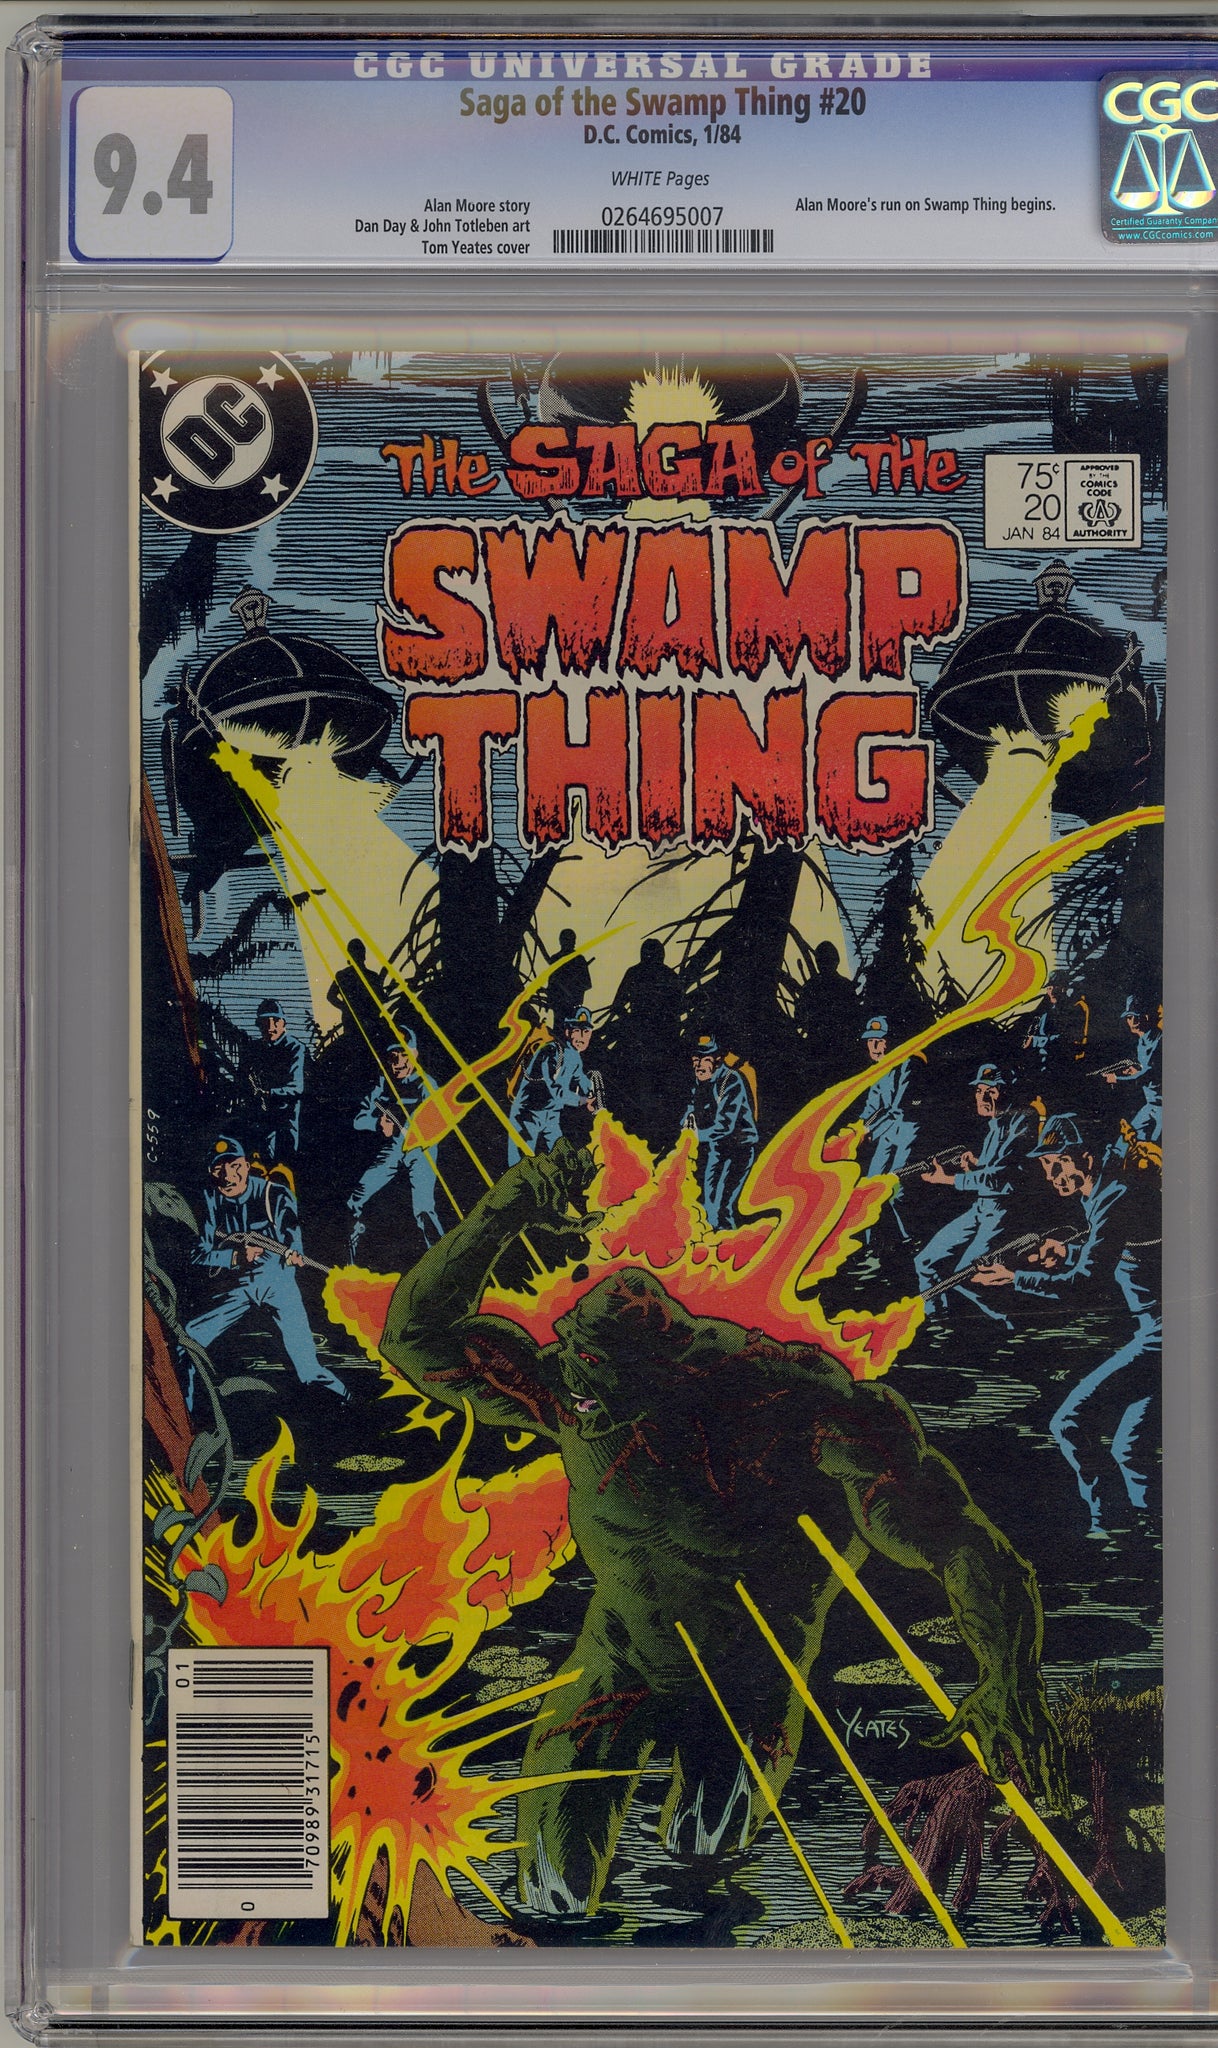 Saga of the Swamp Thing #20 (1984) newsstand edition